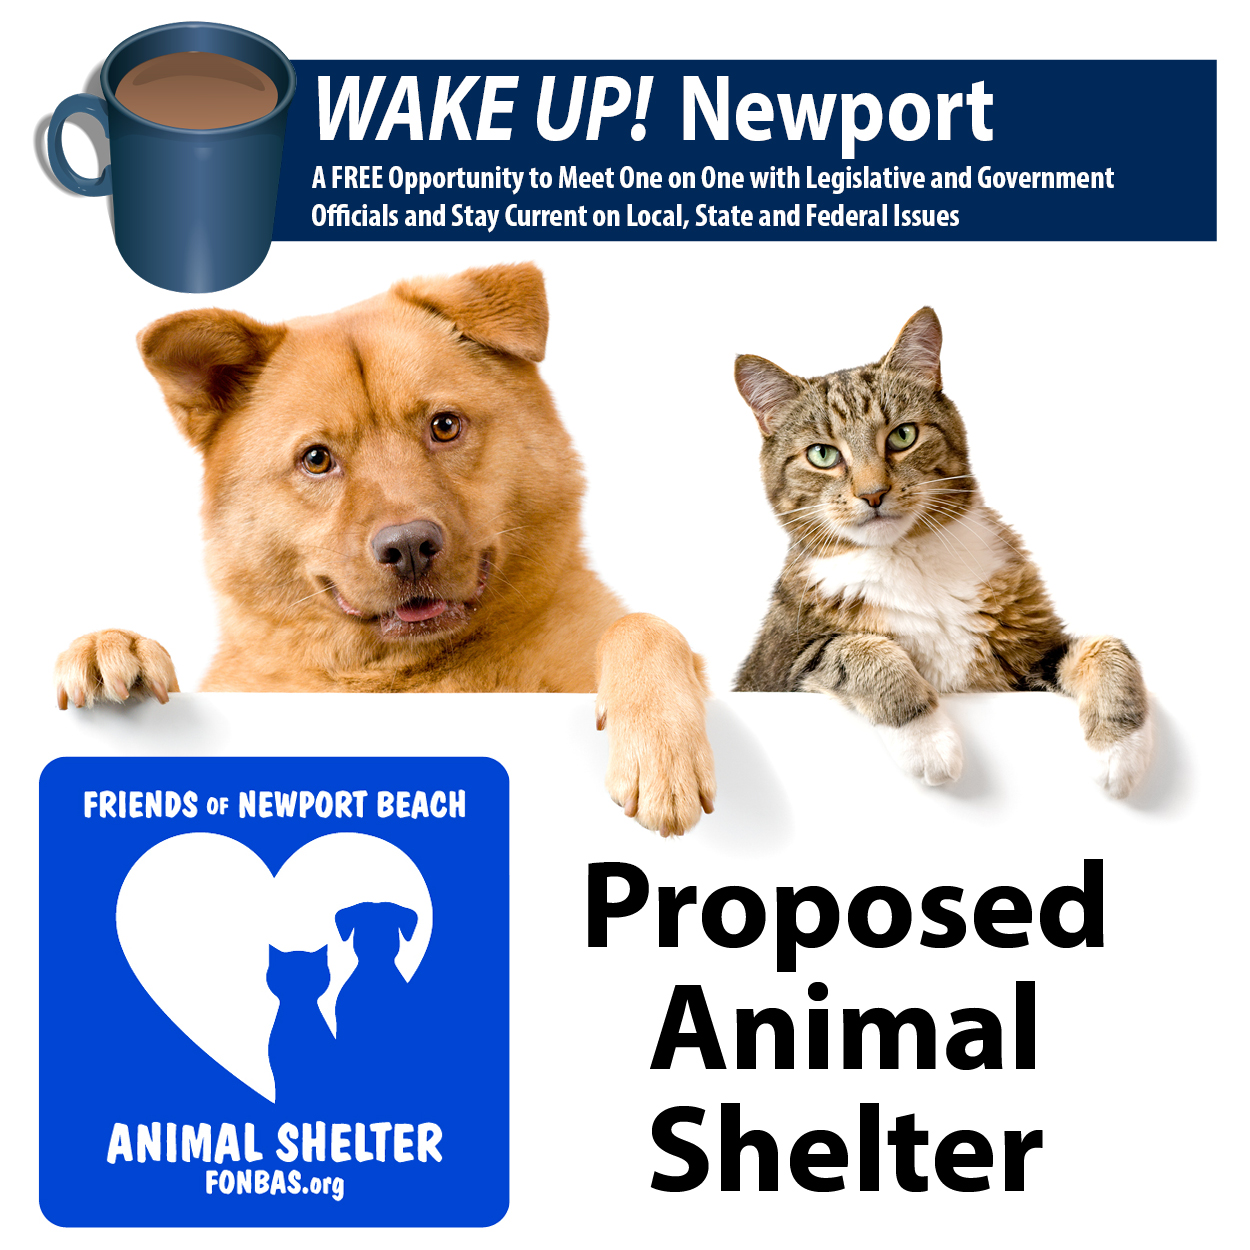 April WAKE UP! Newport - Proposed Animal Shelter in Newport Beach